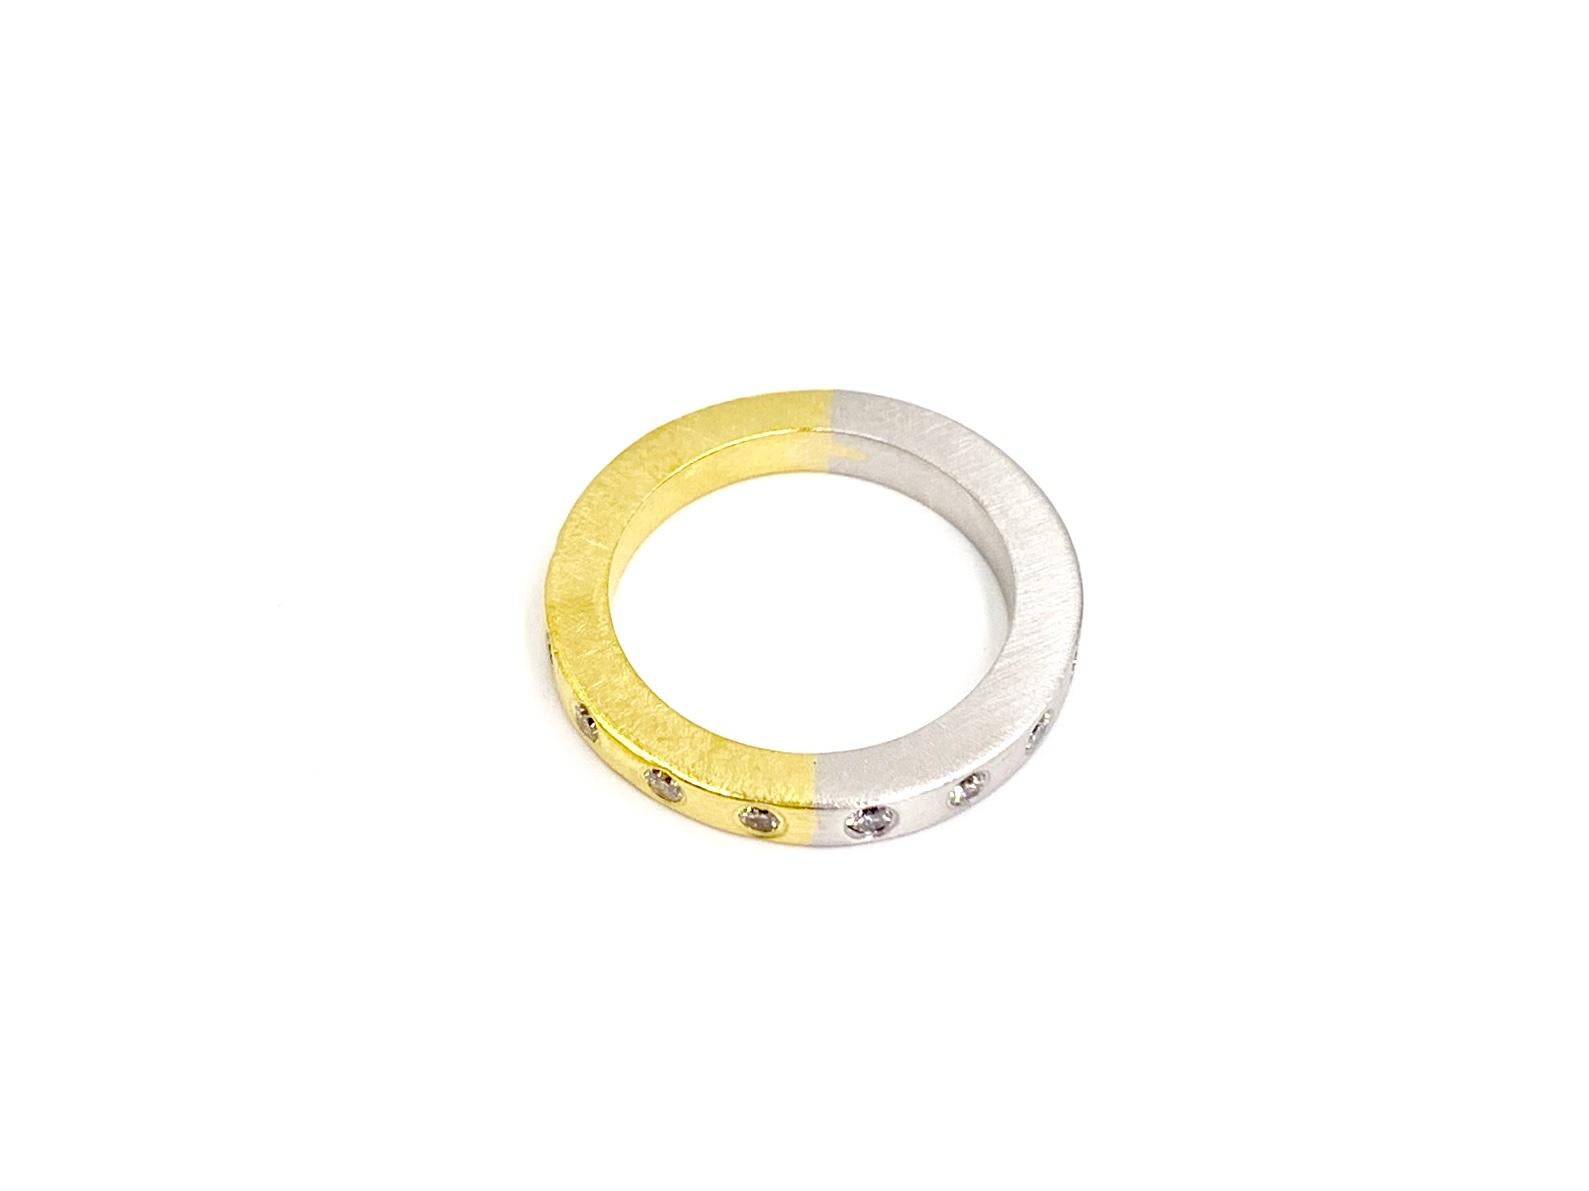 A clean, modern and well crafted solid platinum and 18 karat yellow gold 3mm satin finished band featuring 16 burnished round brilliant diamonds at .40 carats total weight. Diamond quality is approximately F color, VS2 clarity (colorless, eye